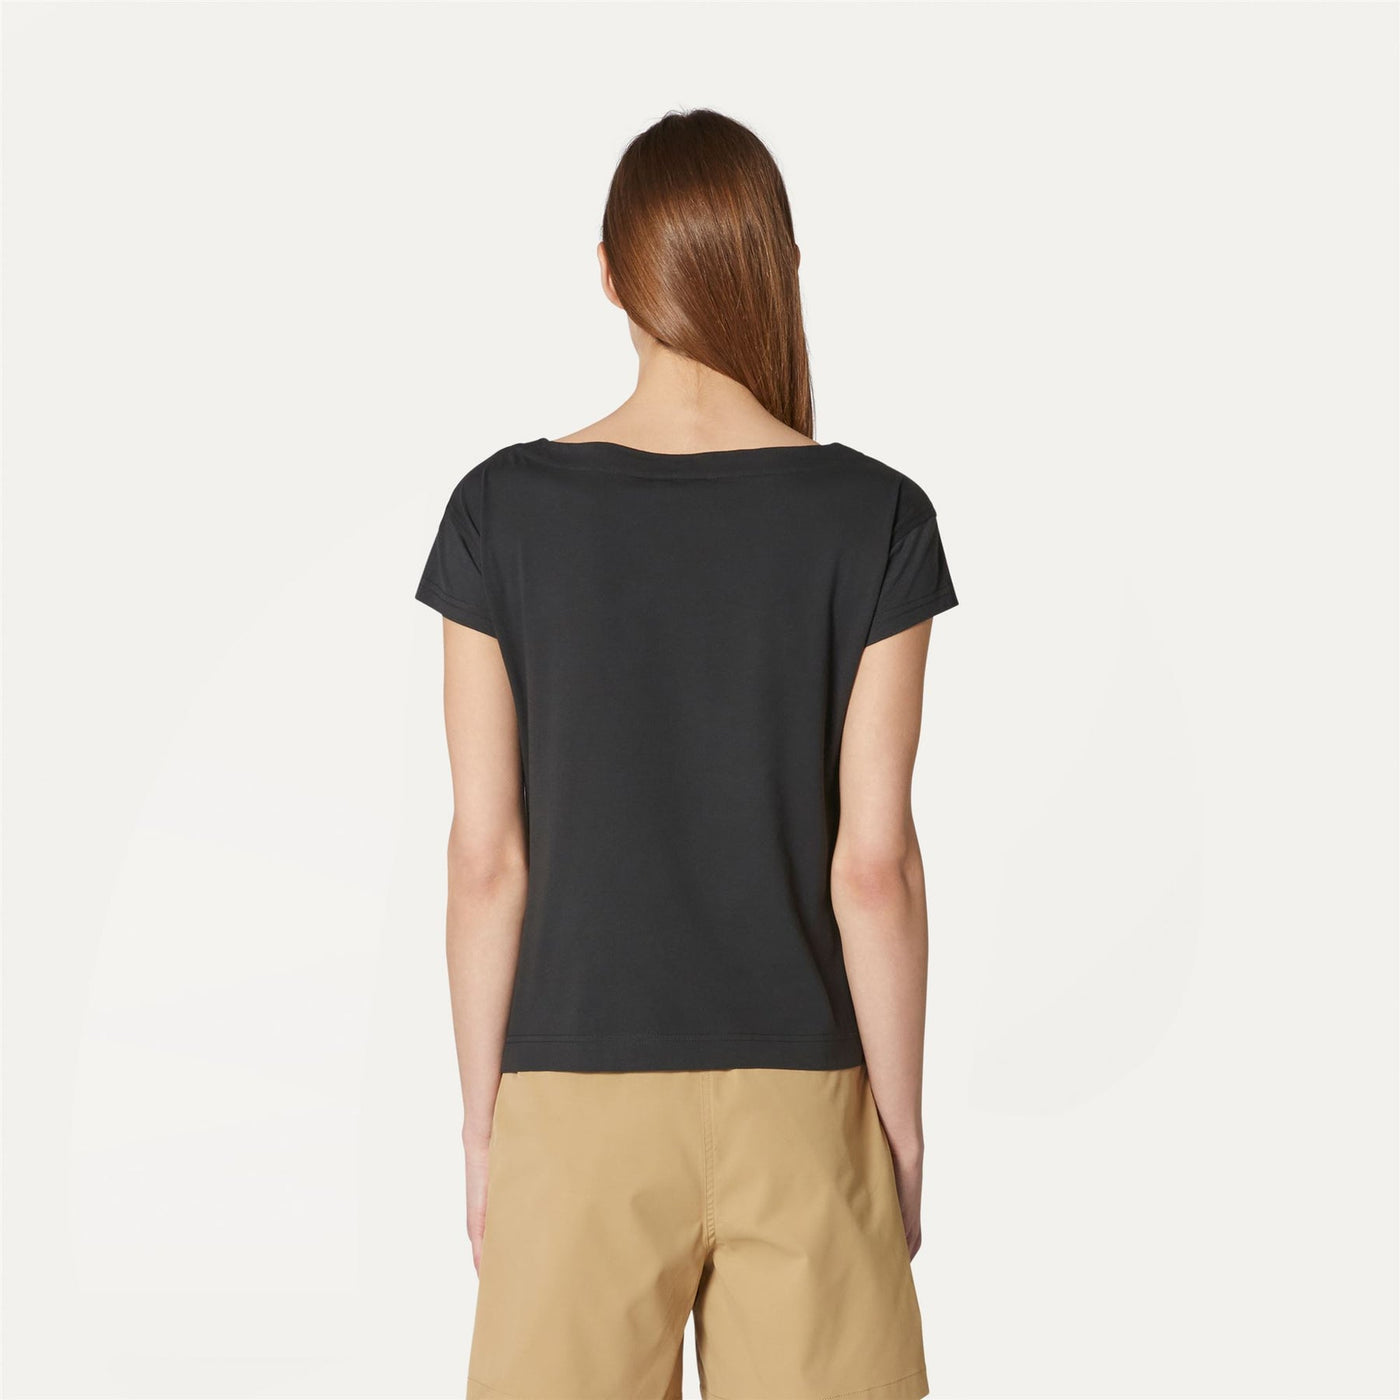 RORY - T-SHIRTS & TOP - WOMAN - BLACK PURE